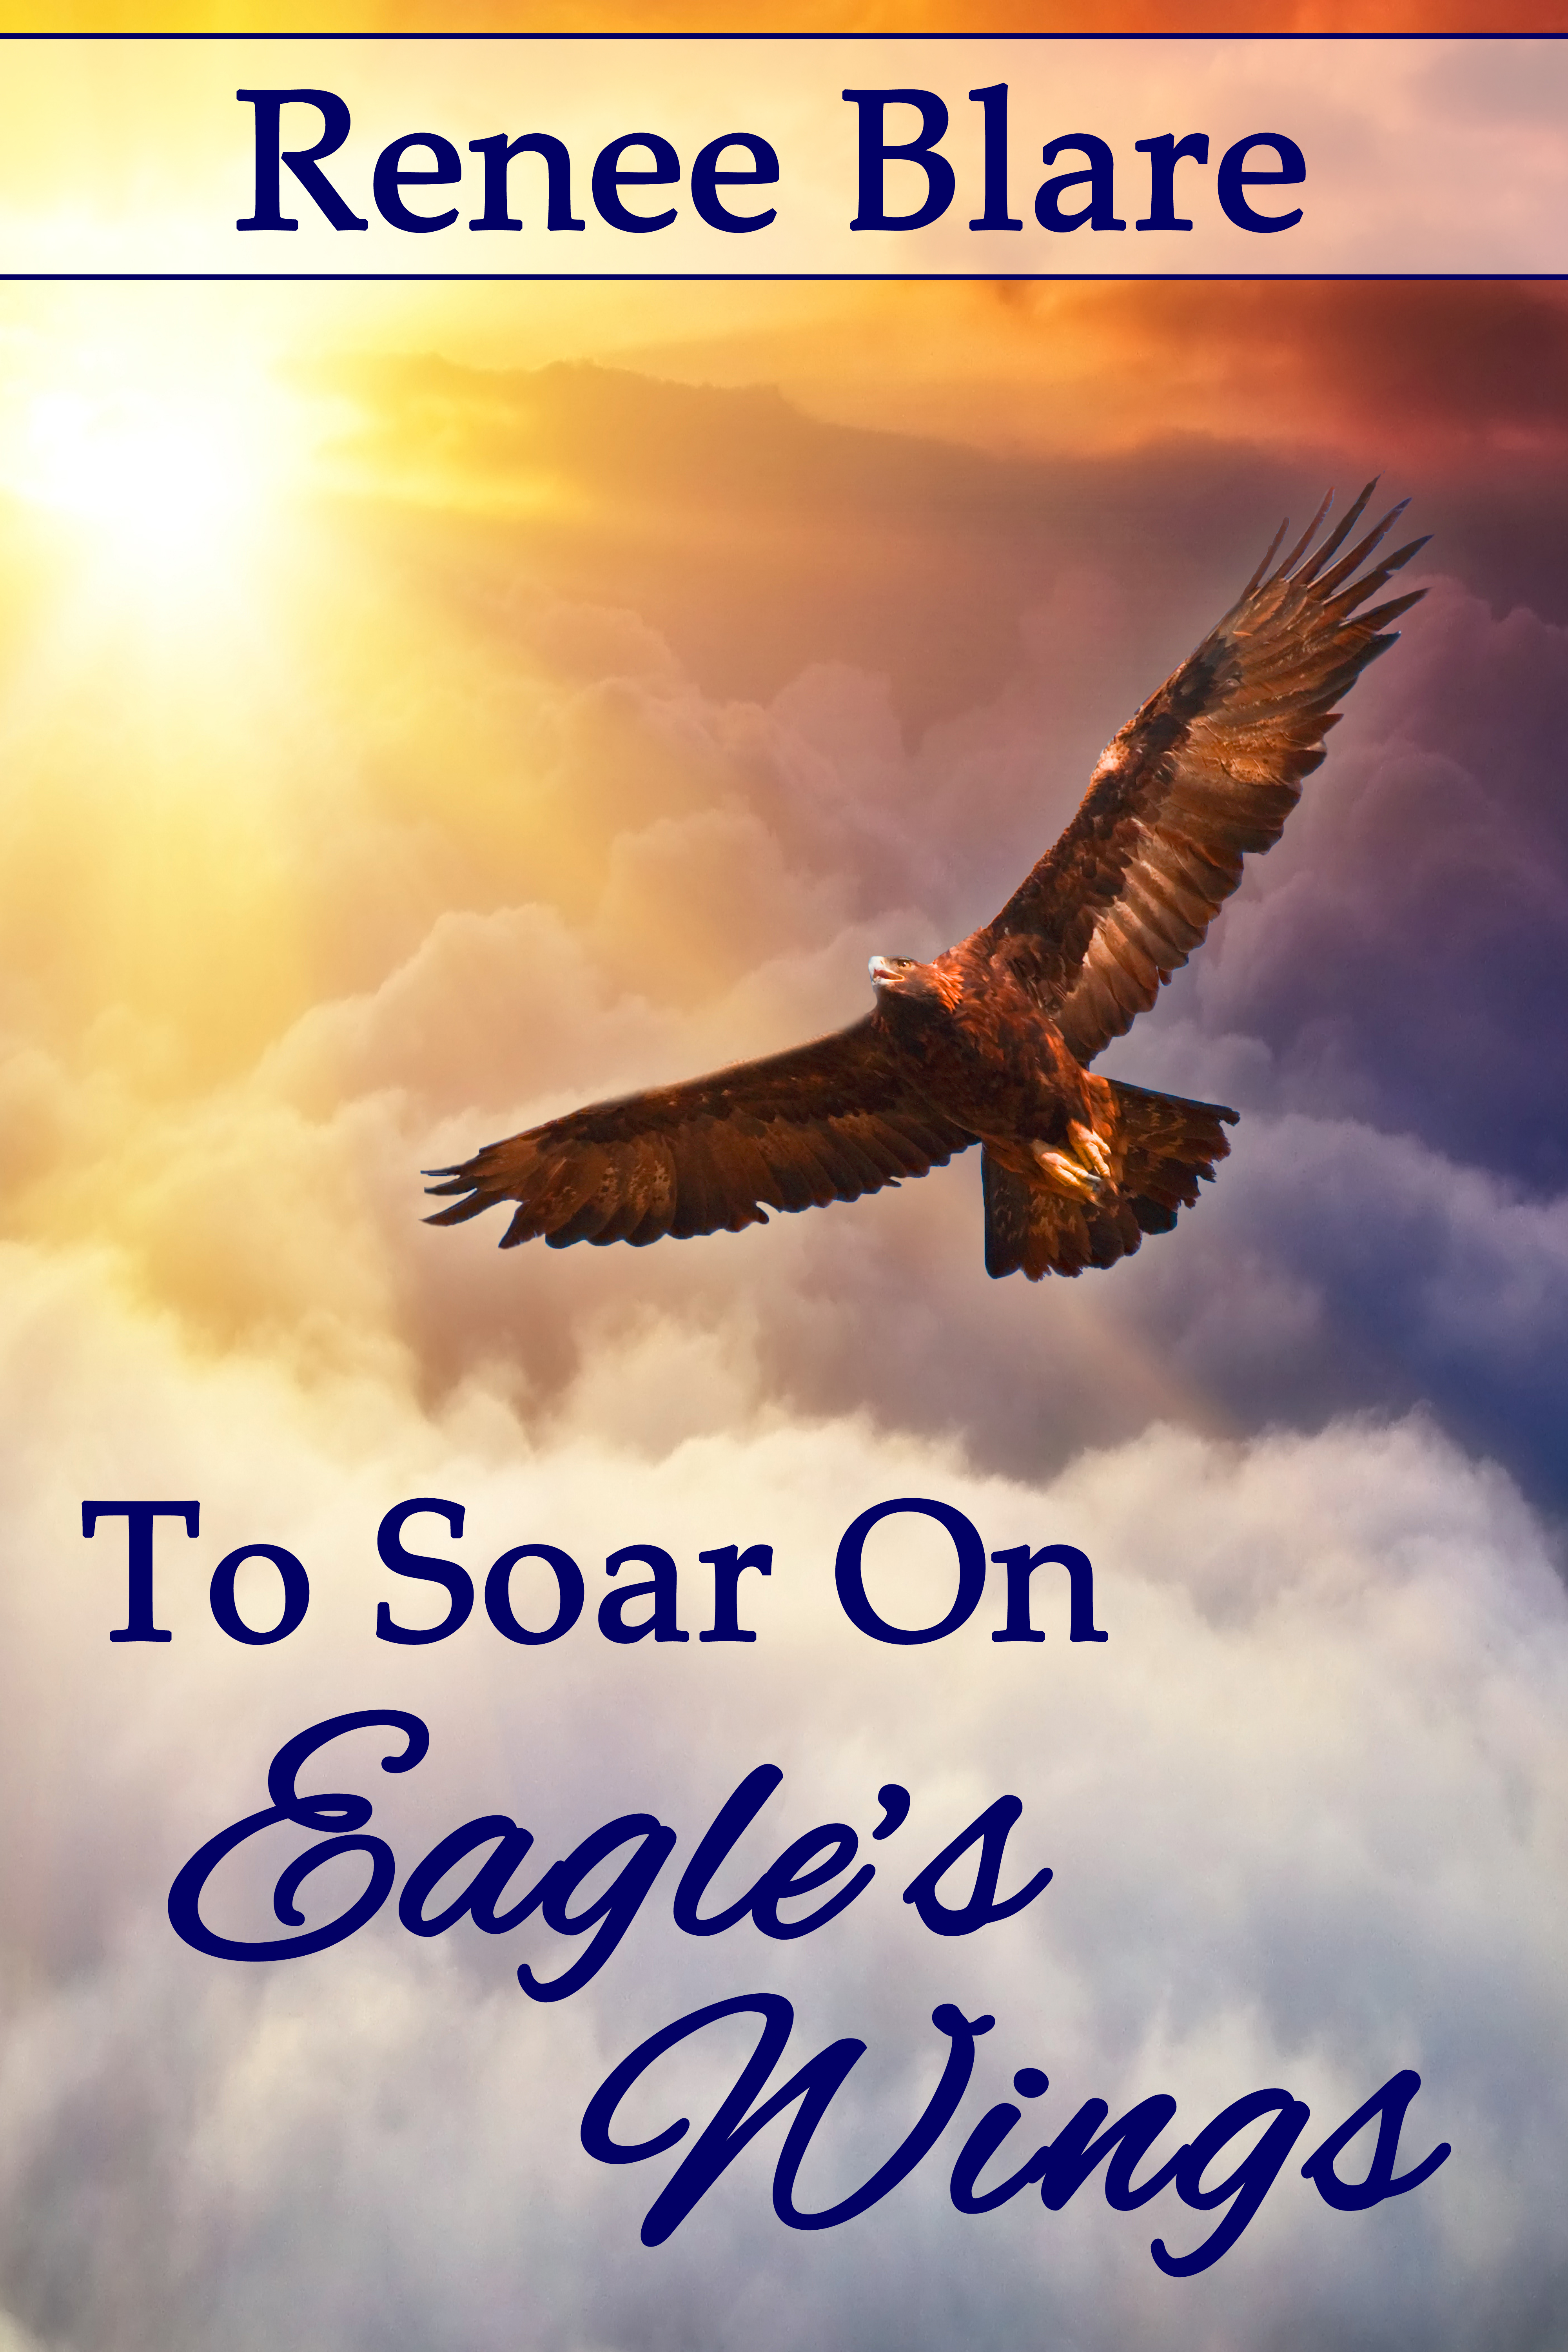 on wings of eagles review